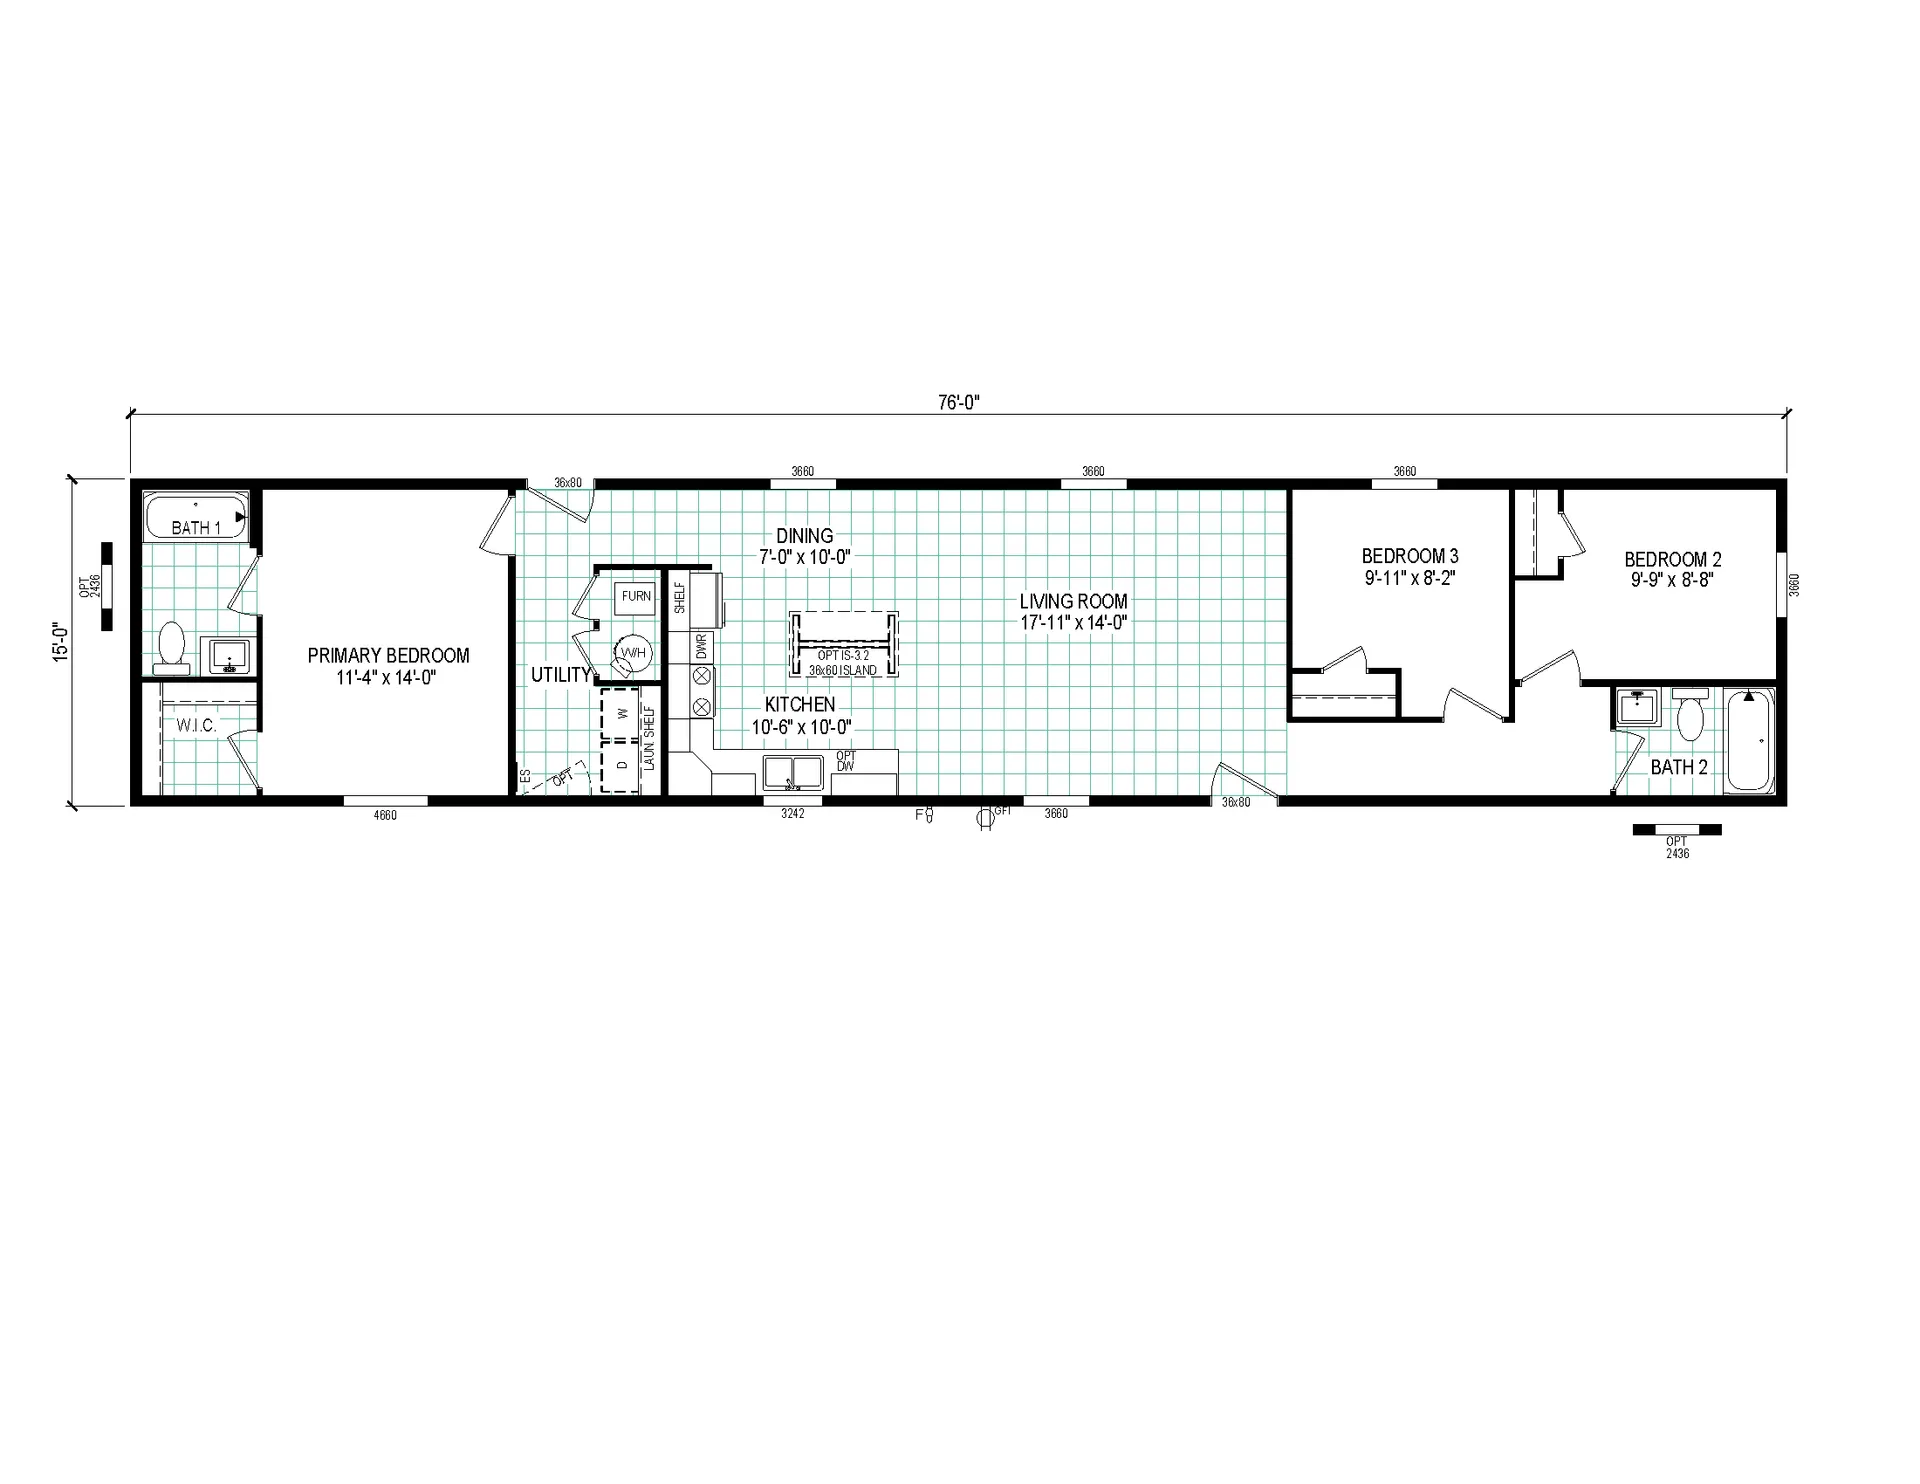 Floor plan of a mobile home with 3 bedrooms.